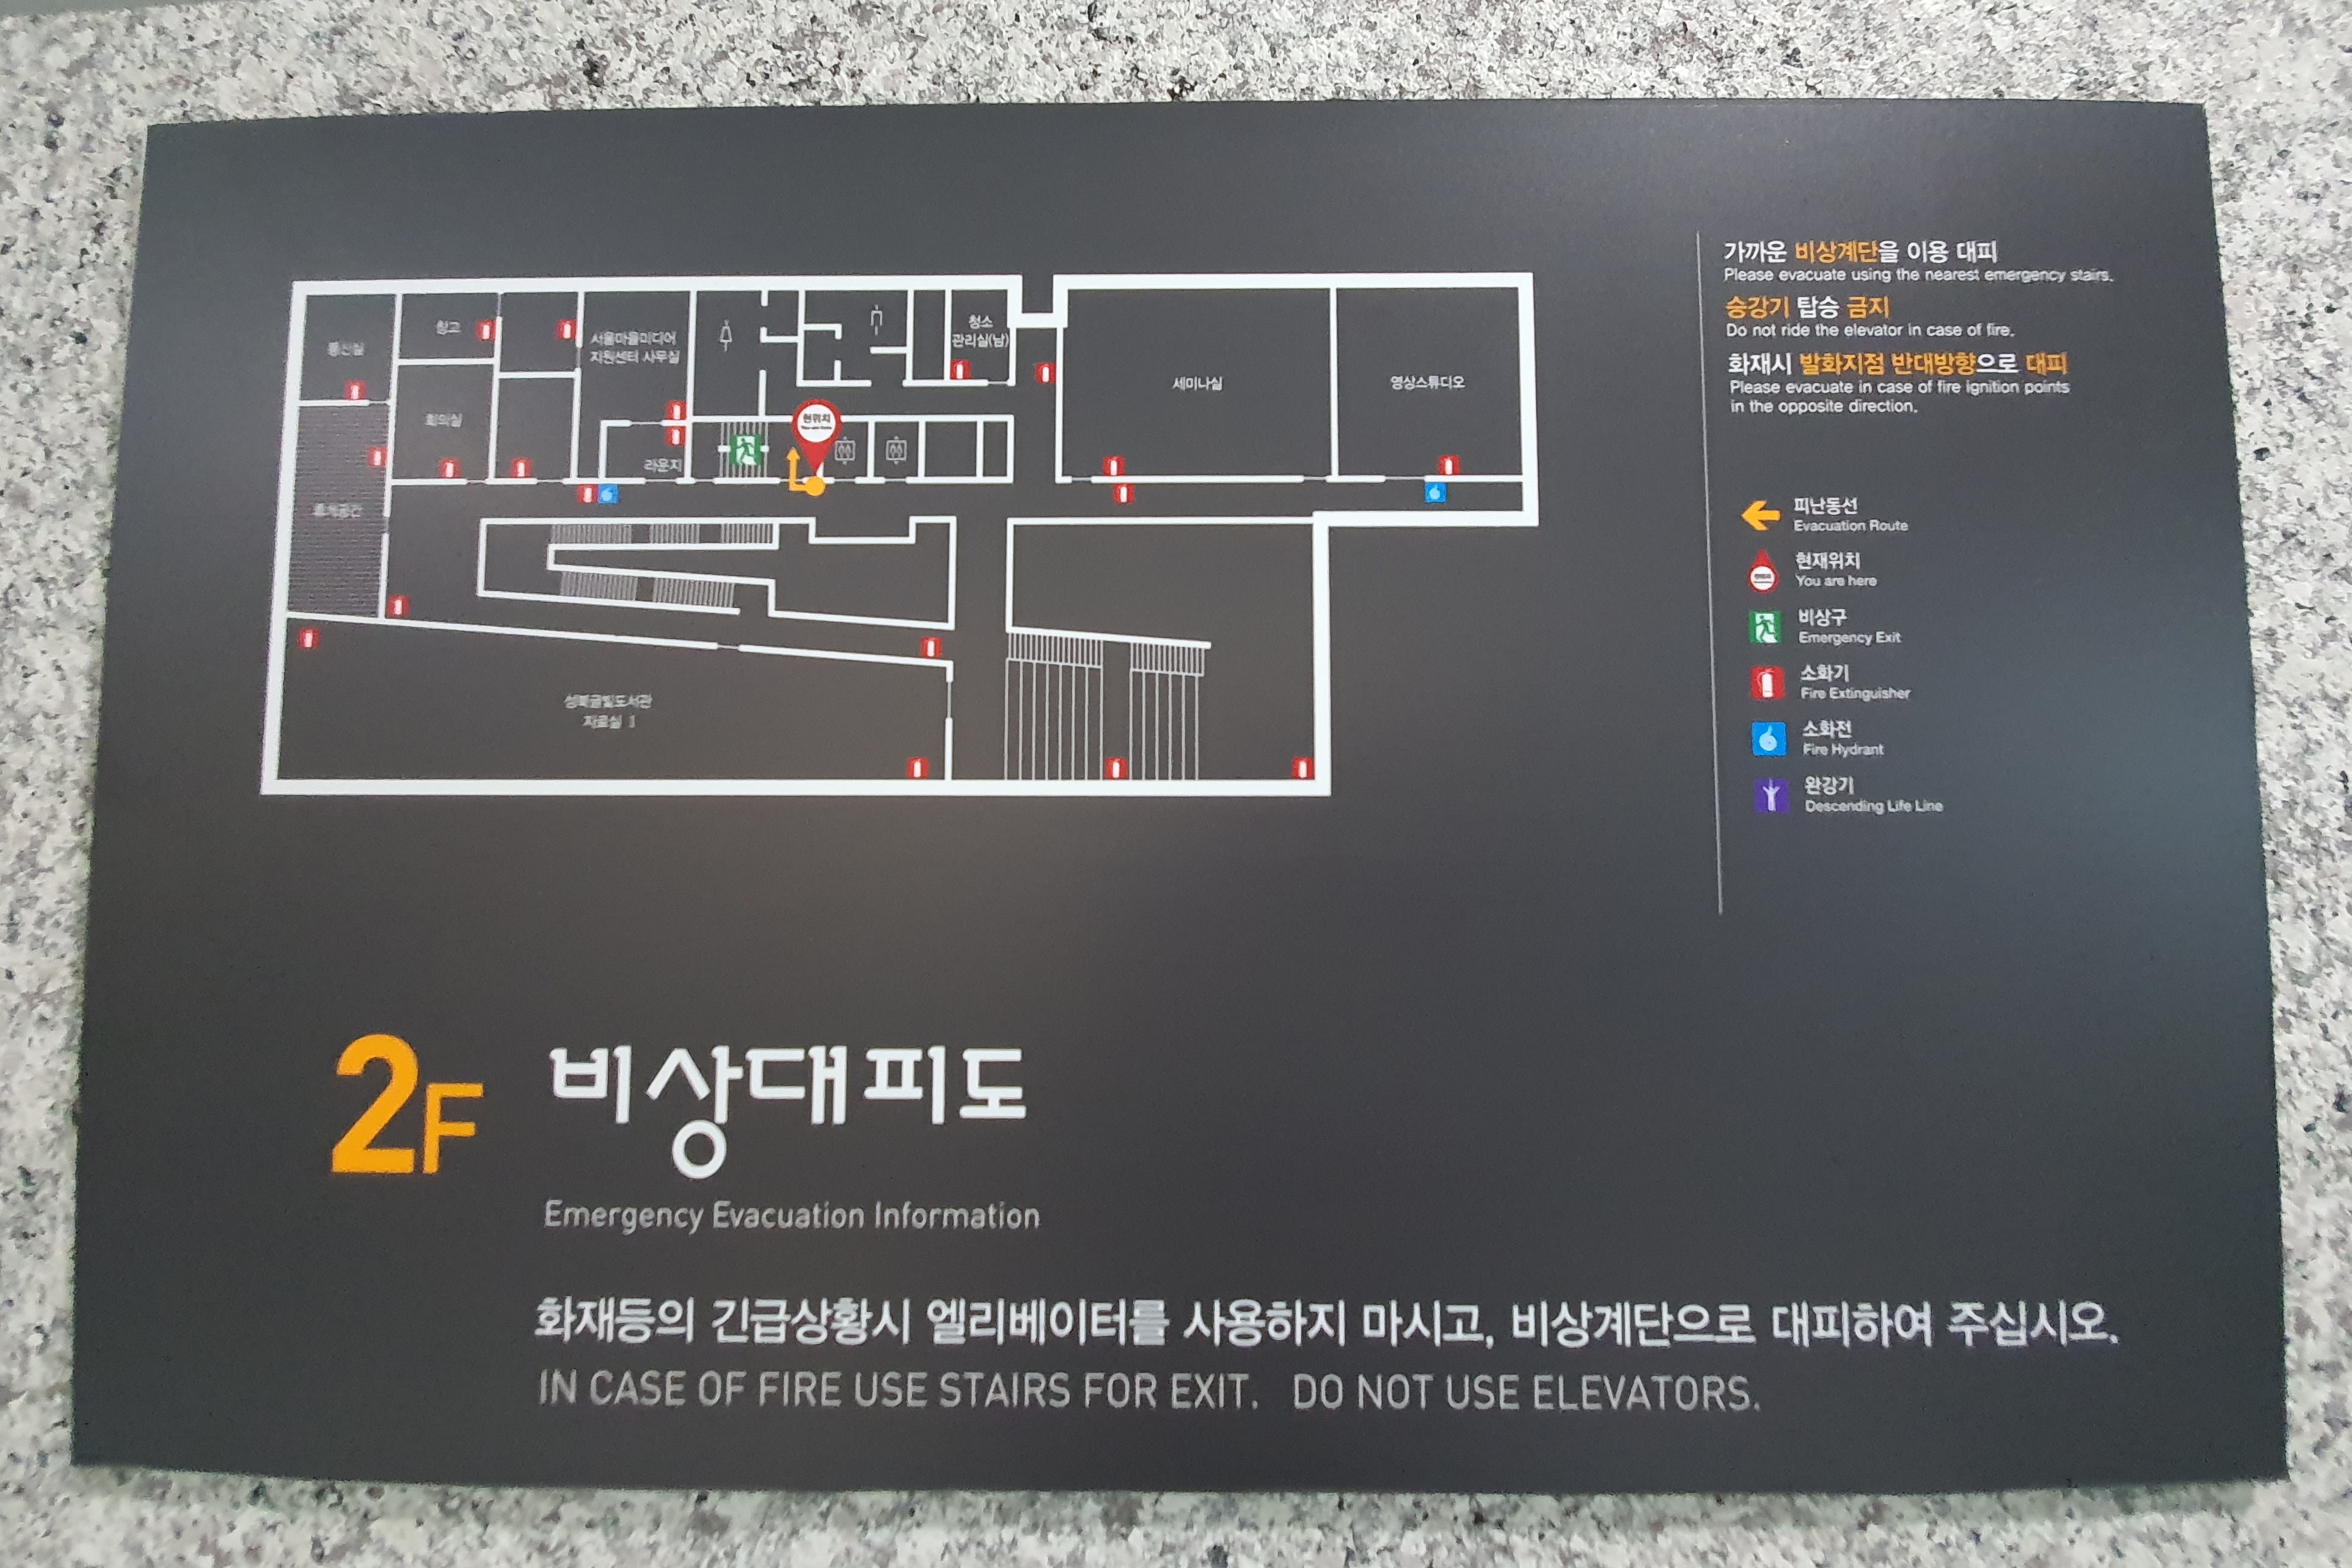 Guide map and information desk0 : Emergency evacuation map and notice board for the entire 2nd floor
